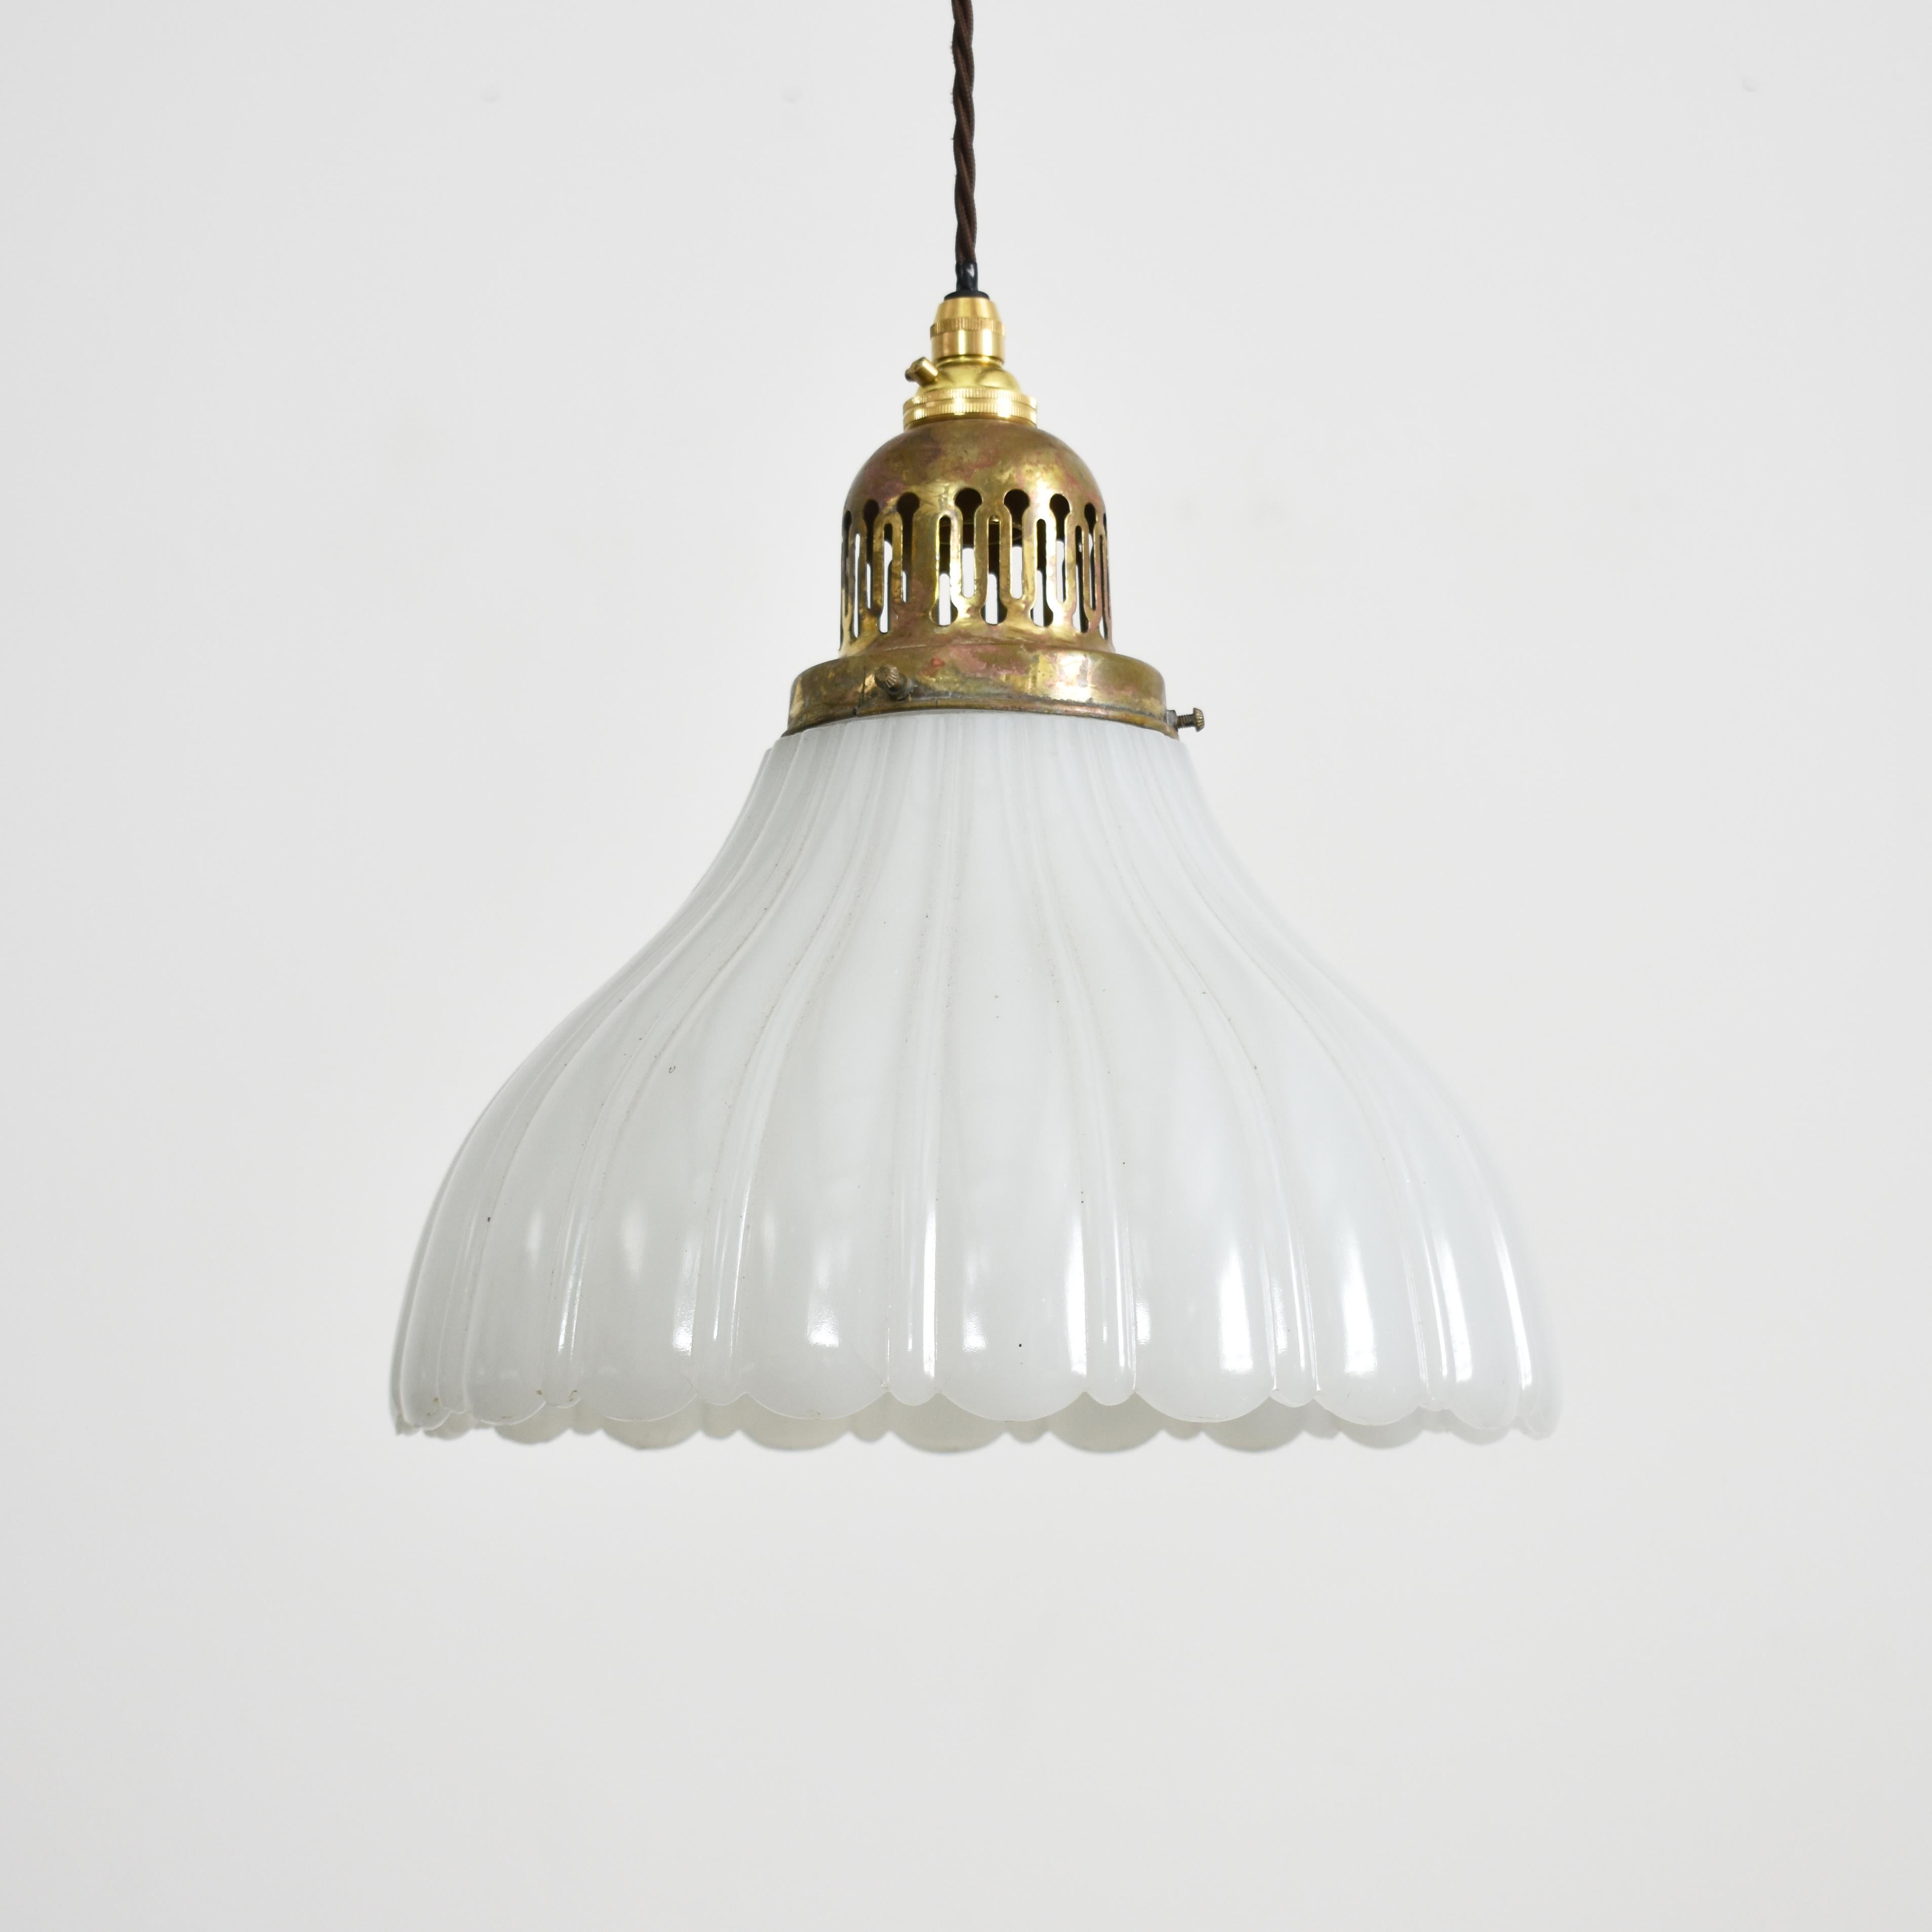 Pair of Antique Jefferson Moonstone Glass Pendant Lights

An early pair of milk glass Jefferson moonstone pendant lights. The lights retain their original brass vented galleries. The lights have their makers mark stamped onto the